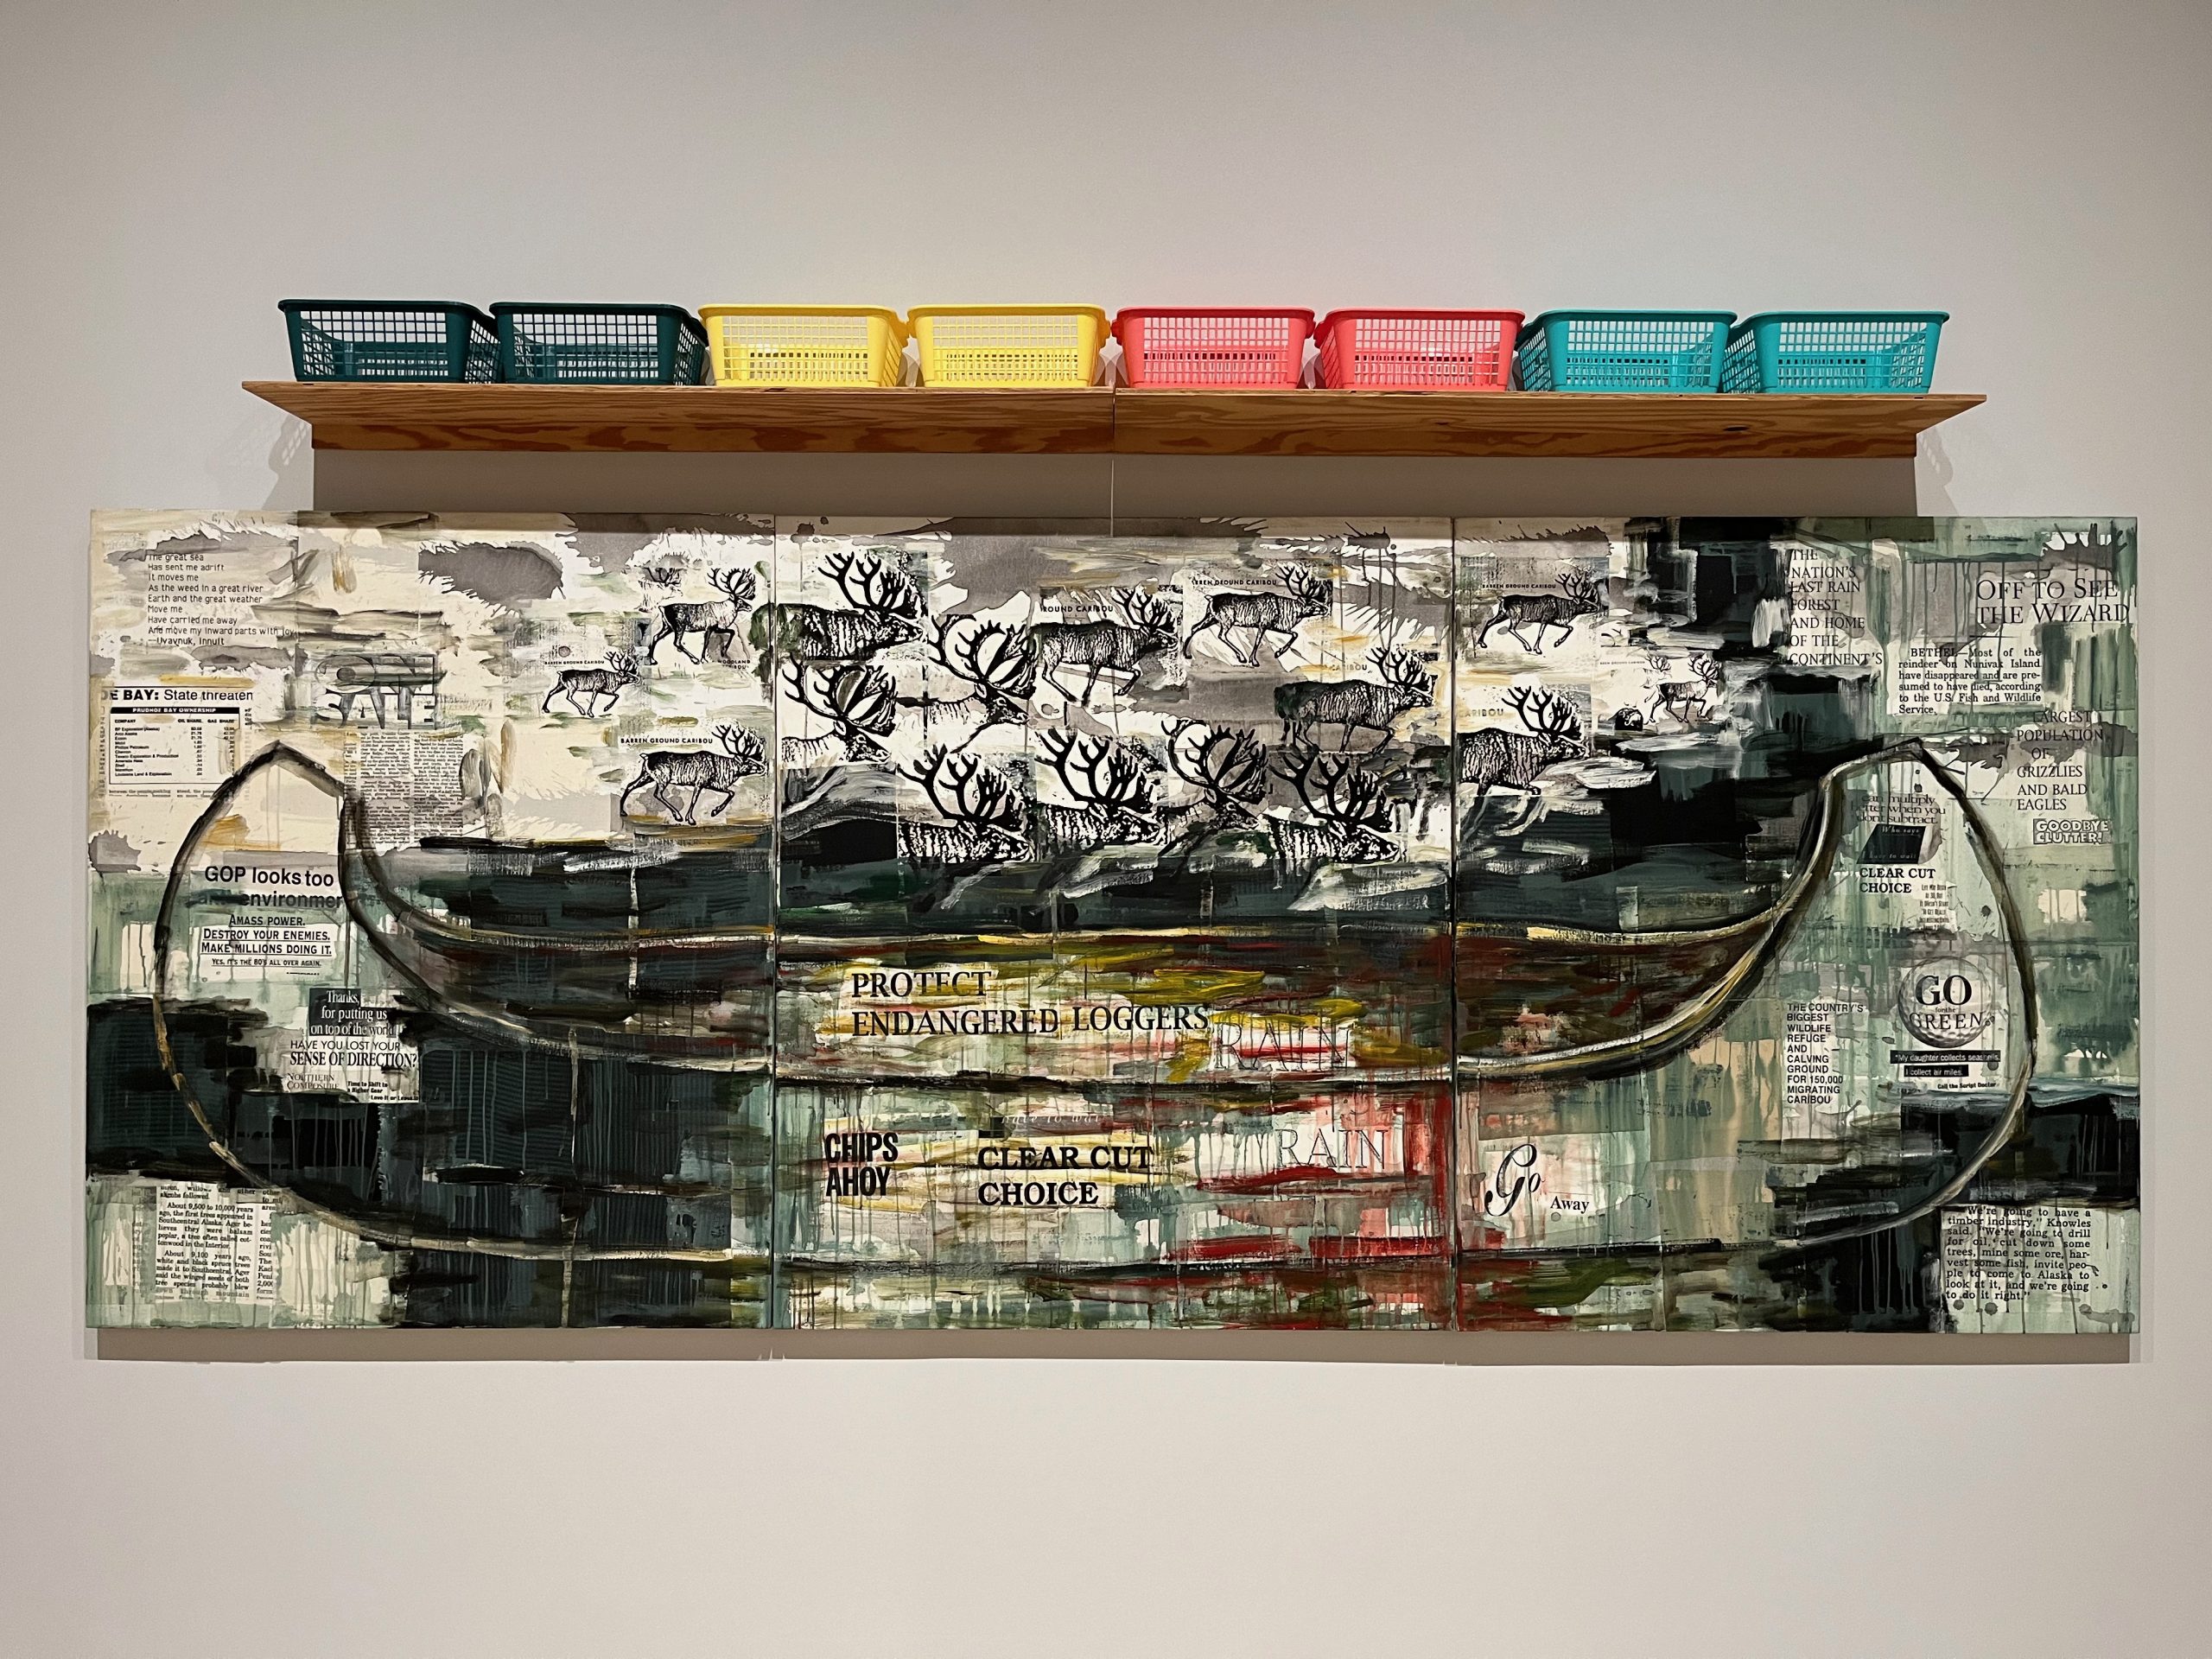 Abstracted, horizontal painting of a canoe with collaged words and figures of elk or deer. Above the painting is a wooden shelf with eight plastic bins of different colors.